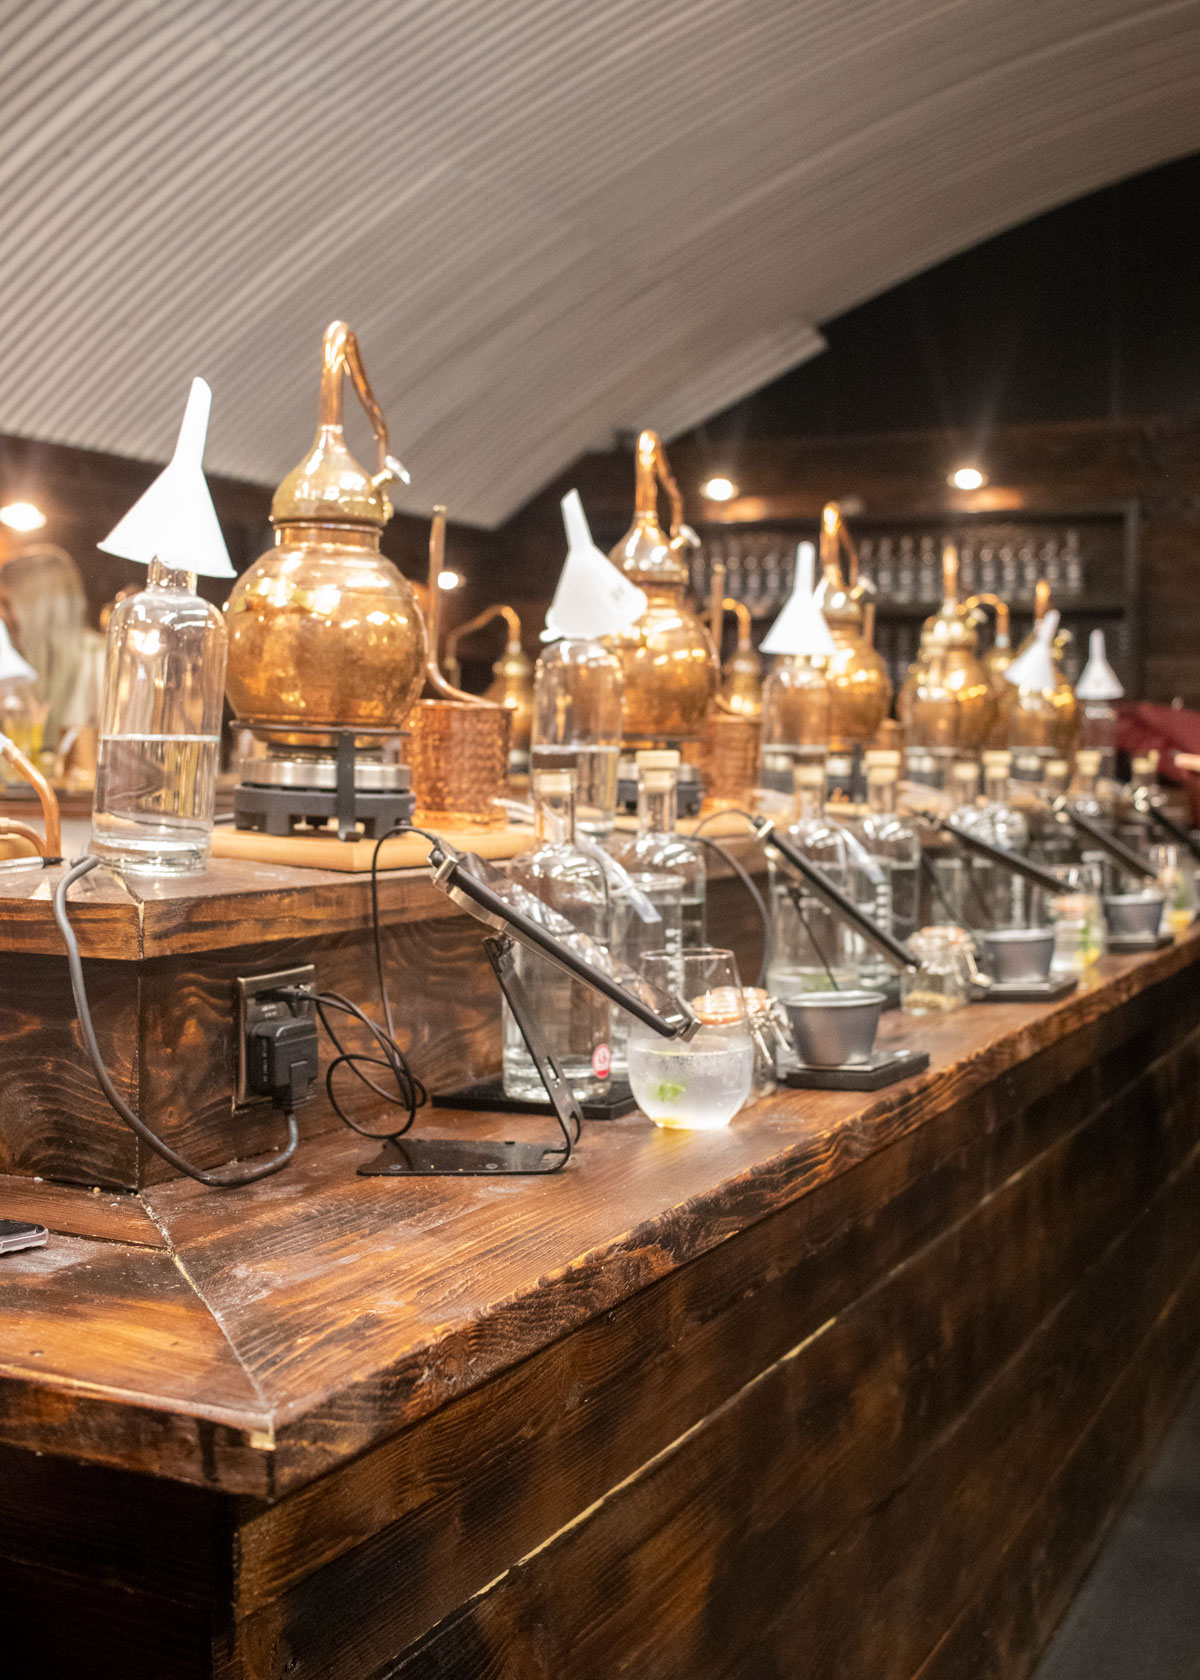 Make-Your-Own-Gin-at-Manchester-Three-Rivers